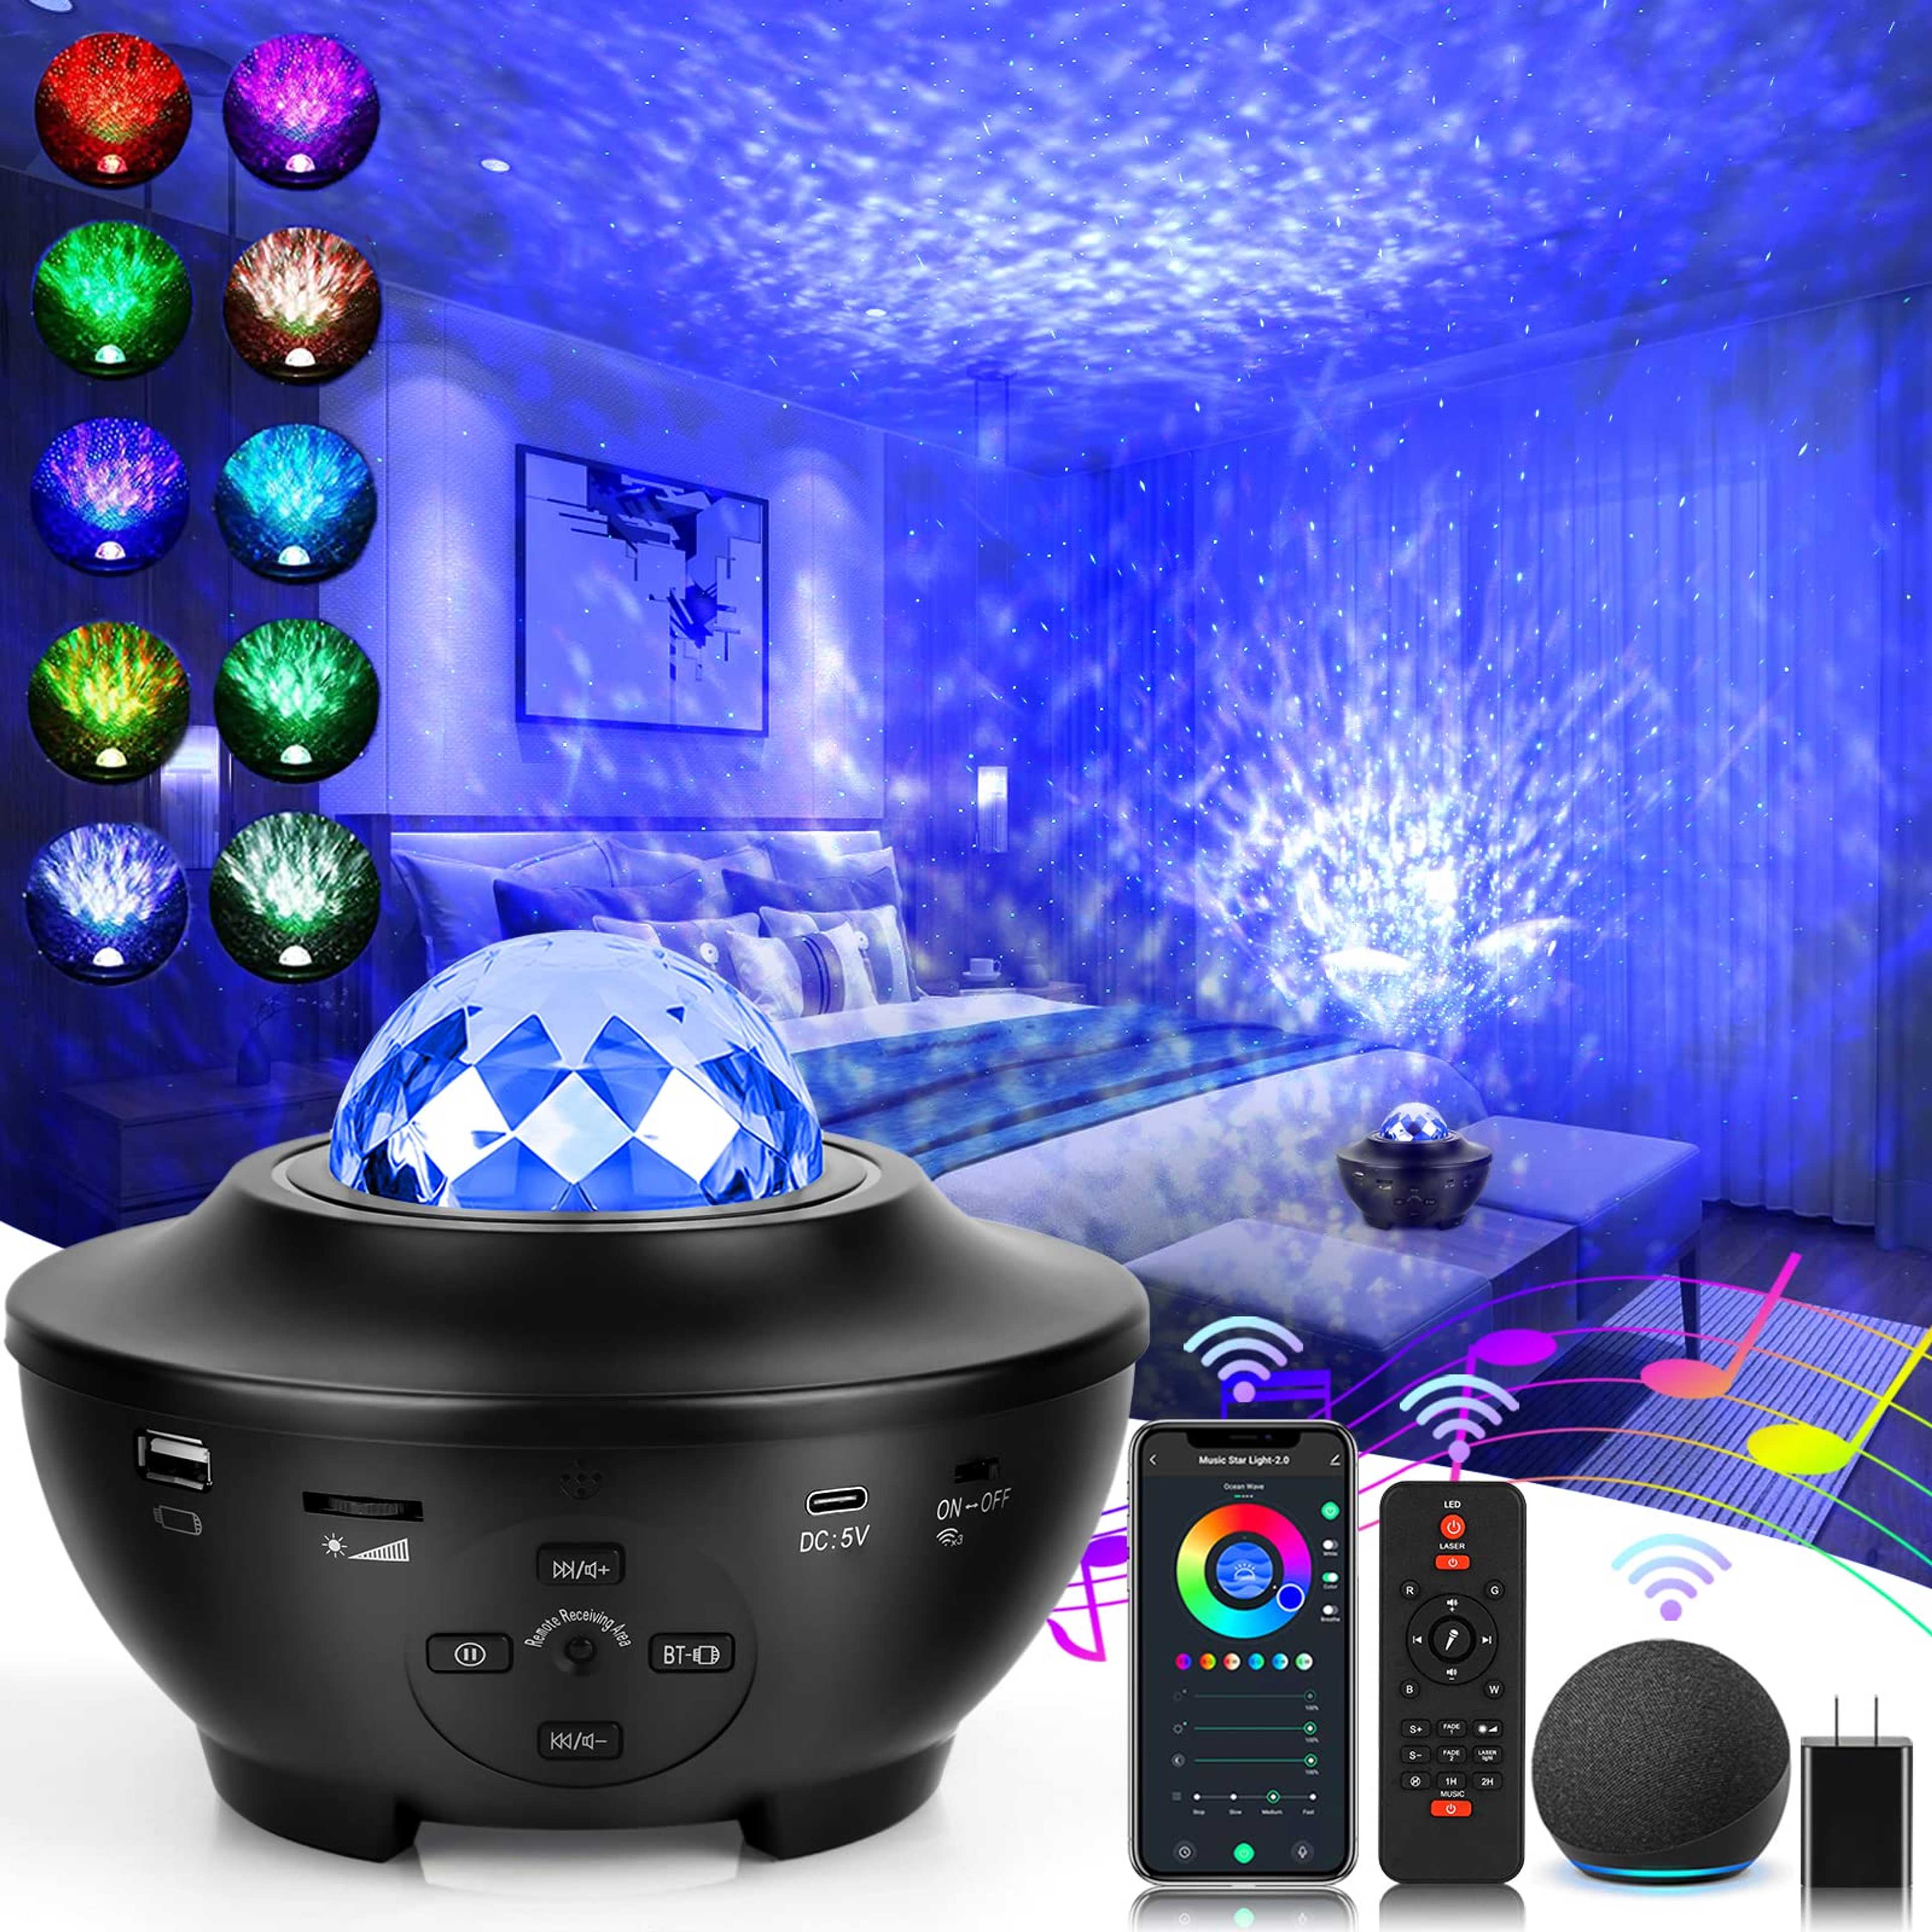 Big Bowl Galaxy projector Night Light Table Lamp Music Starry Water Wave LED Projector Light Bluetooth Projector Sound-Activated Projector Light Decor 21 Lighting Modes